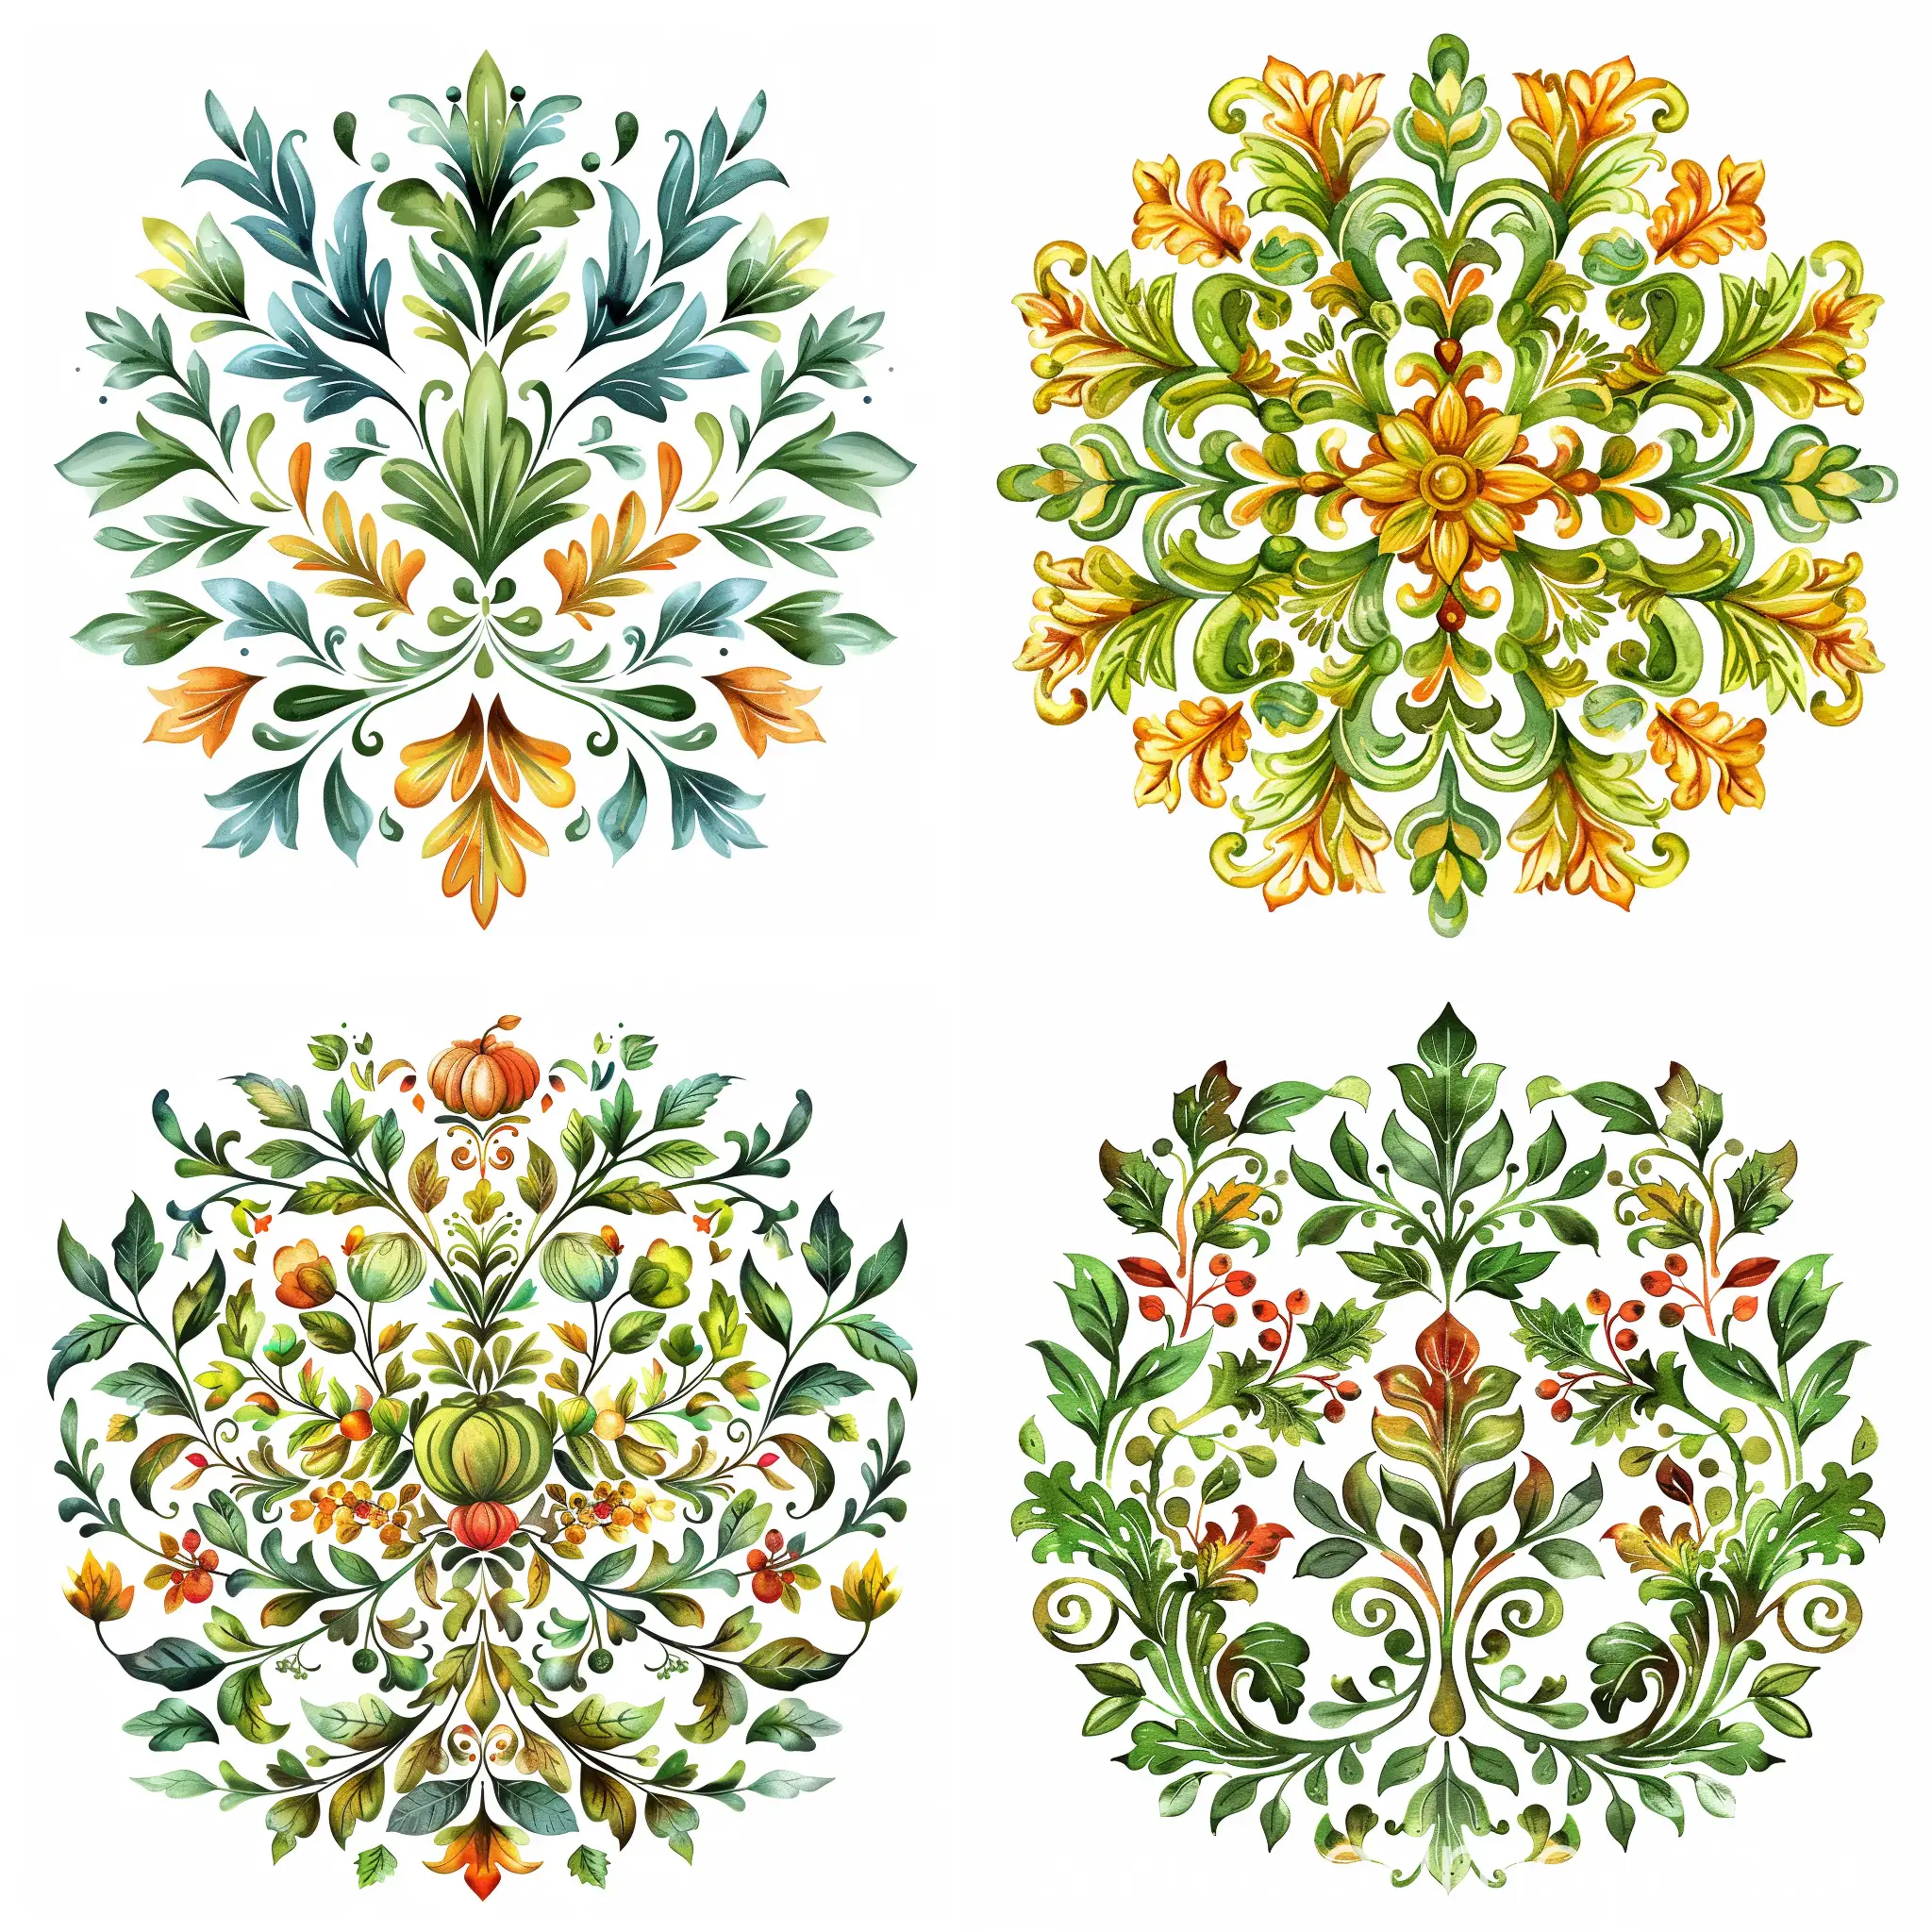 Cheerful-Baroque-Style-Autumn-Ornament-on-White-Background